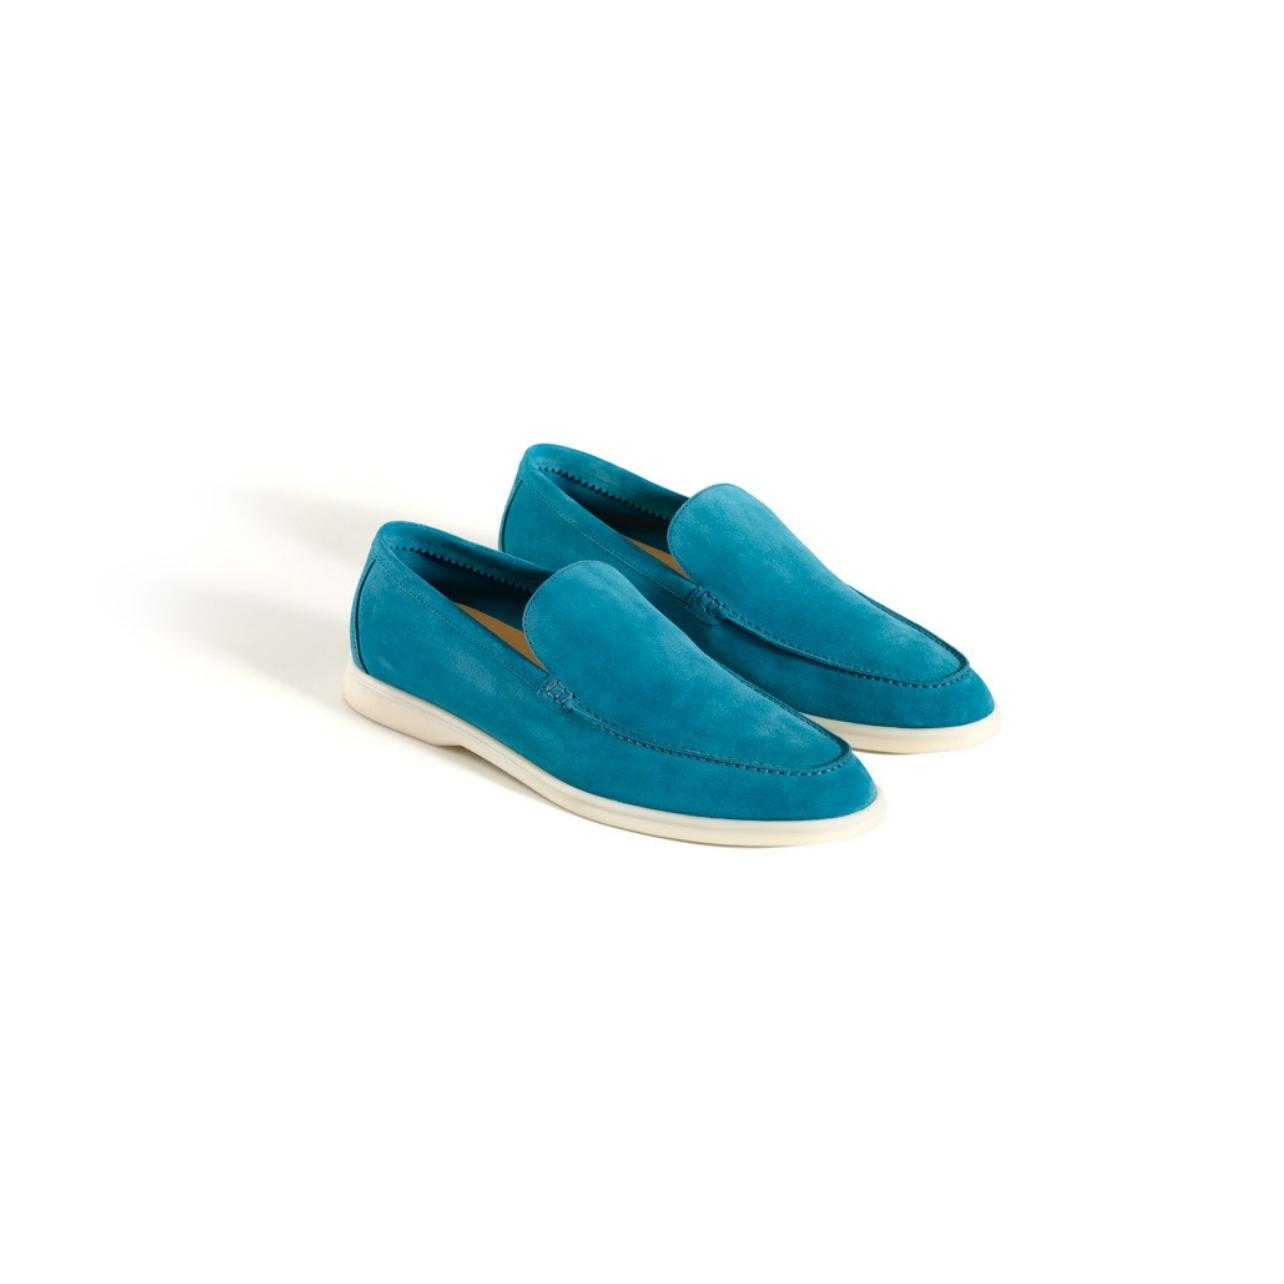 Pair of Loro Piana Summer Walk loafers in suede blue